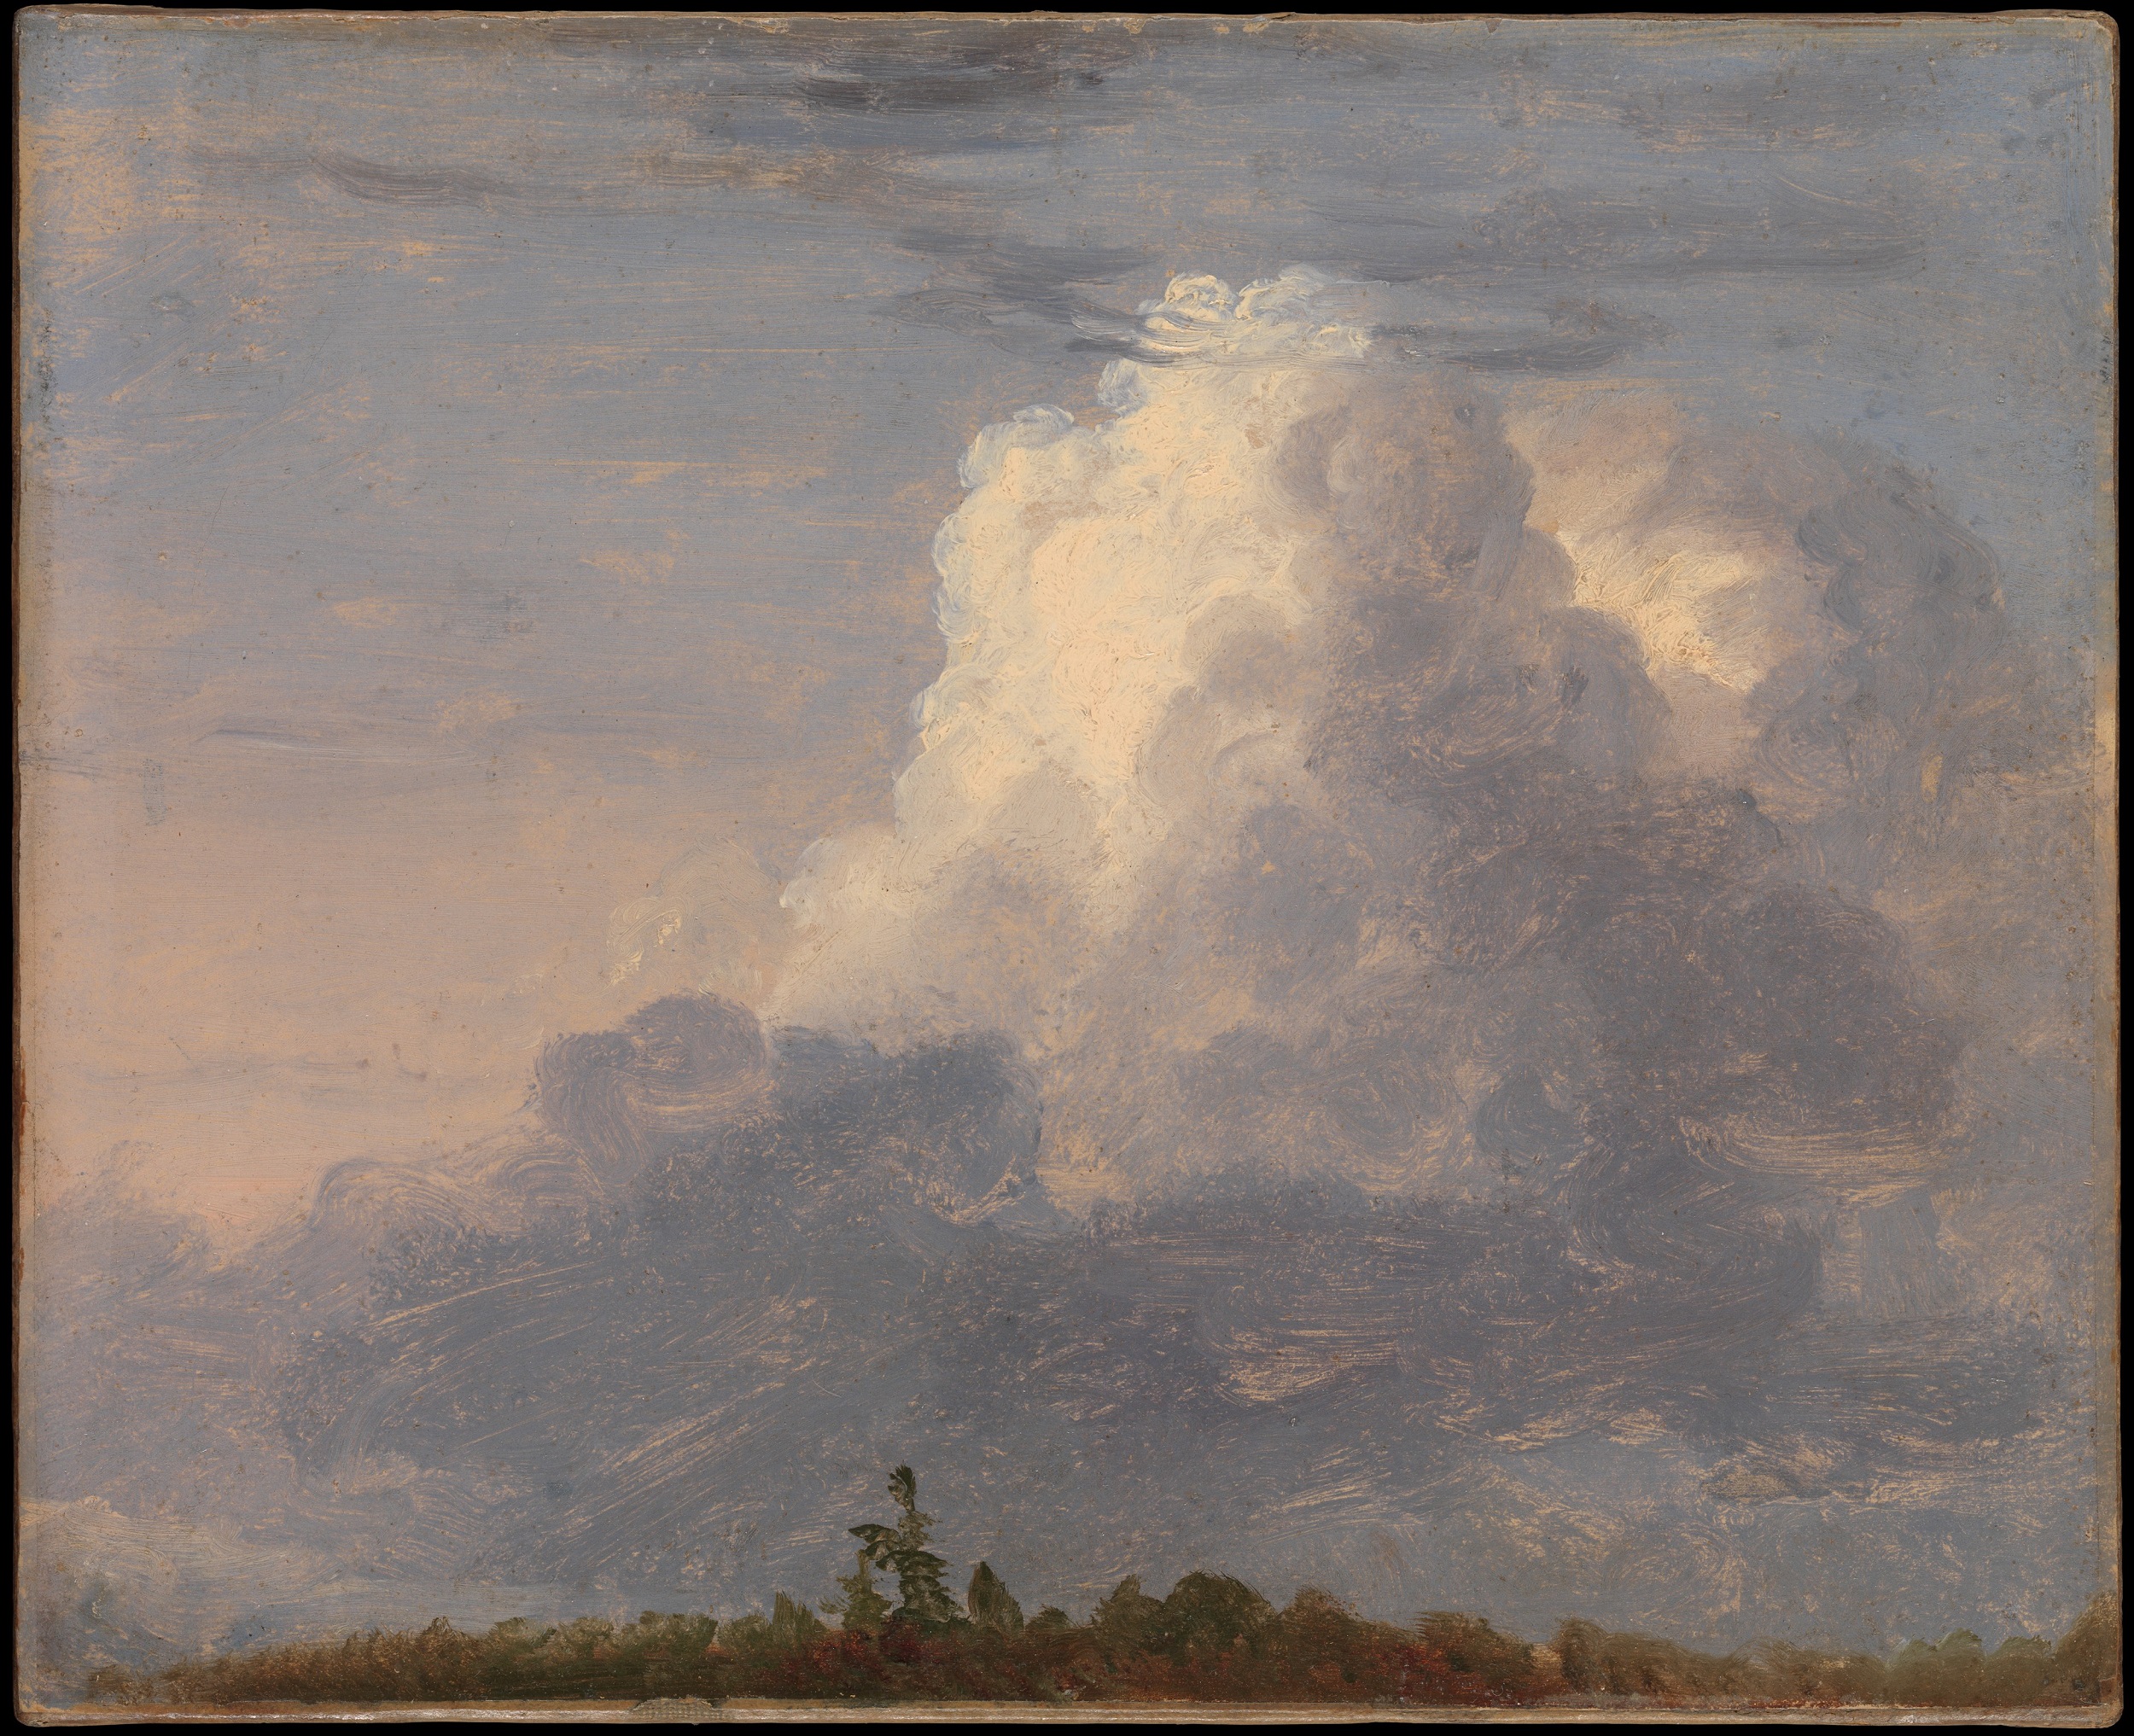 Oil painting of a tall, fluffy cloud formation against a sky at dawn or twilight, with the suggestion of distant green trees below